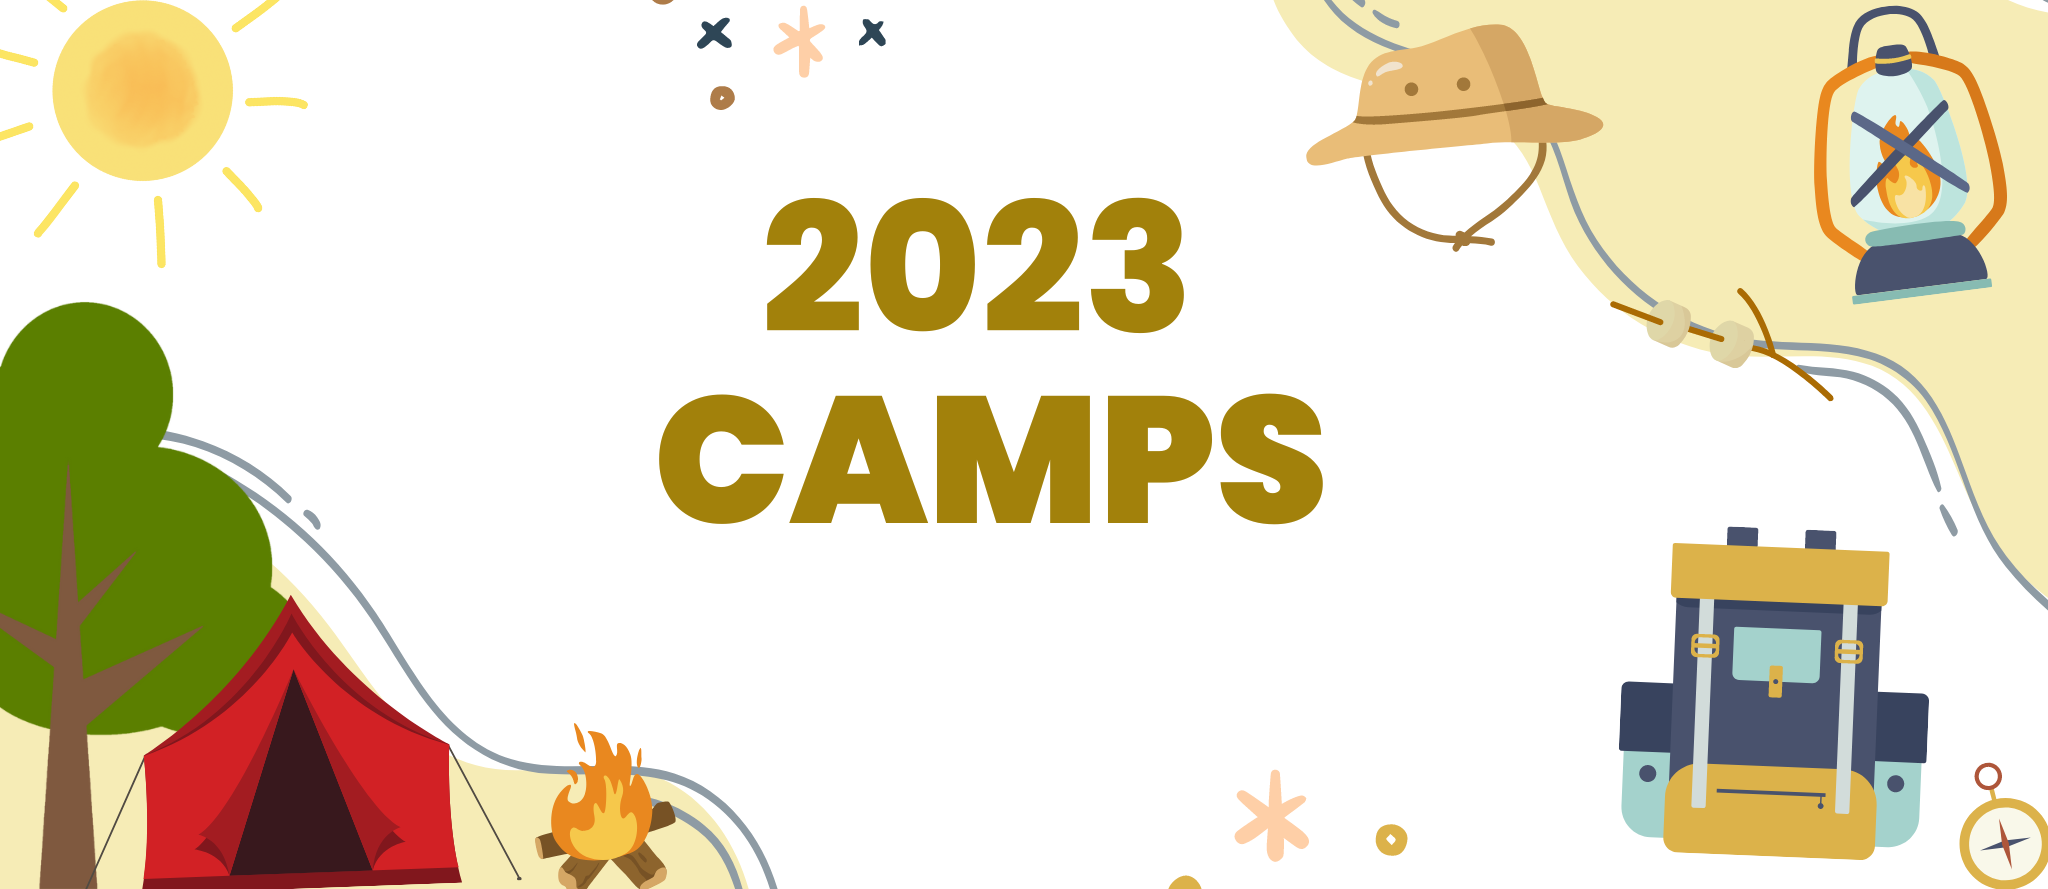 2023 Camps